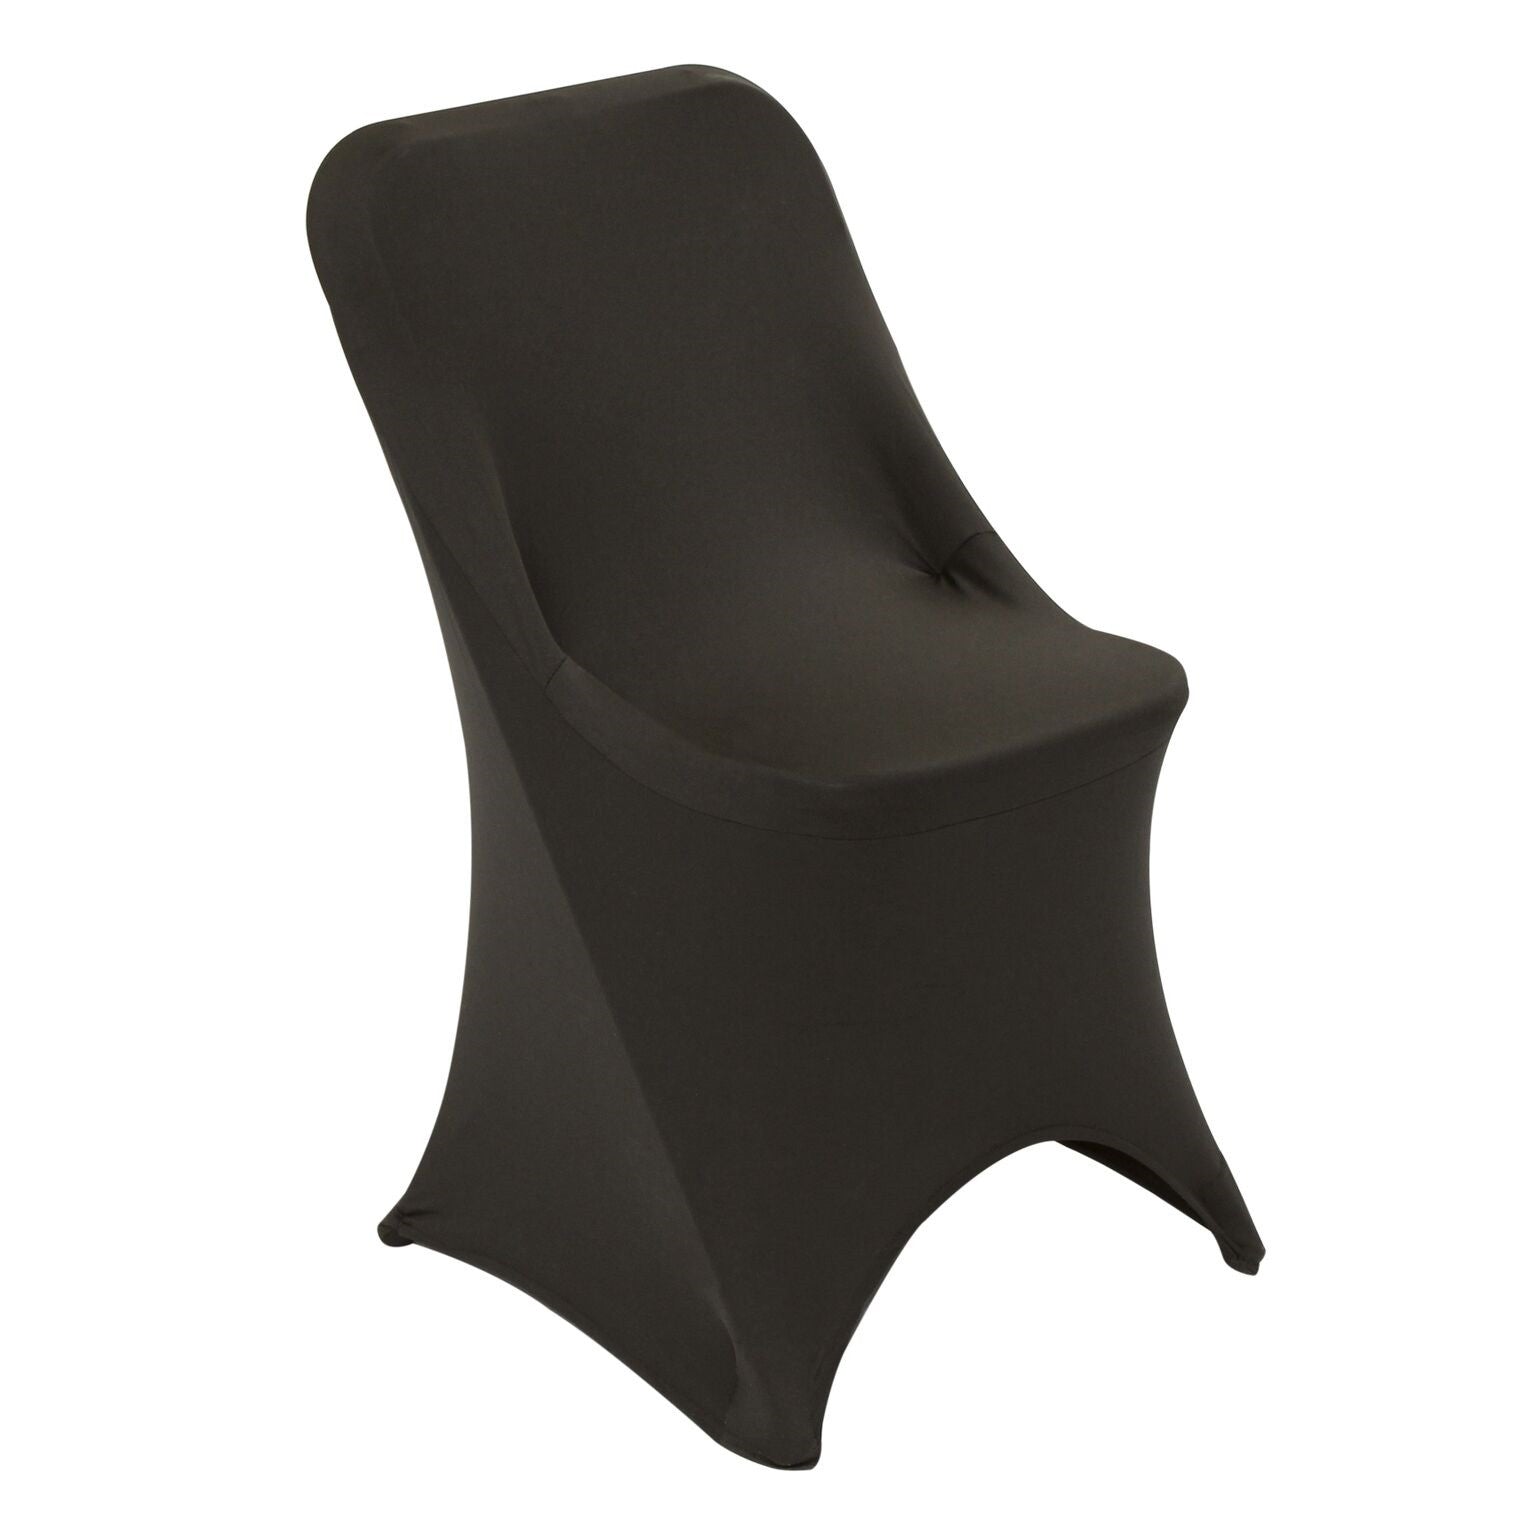 Spandex folding chair cover